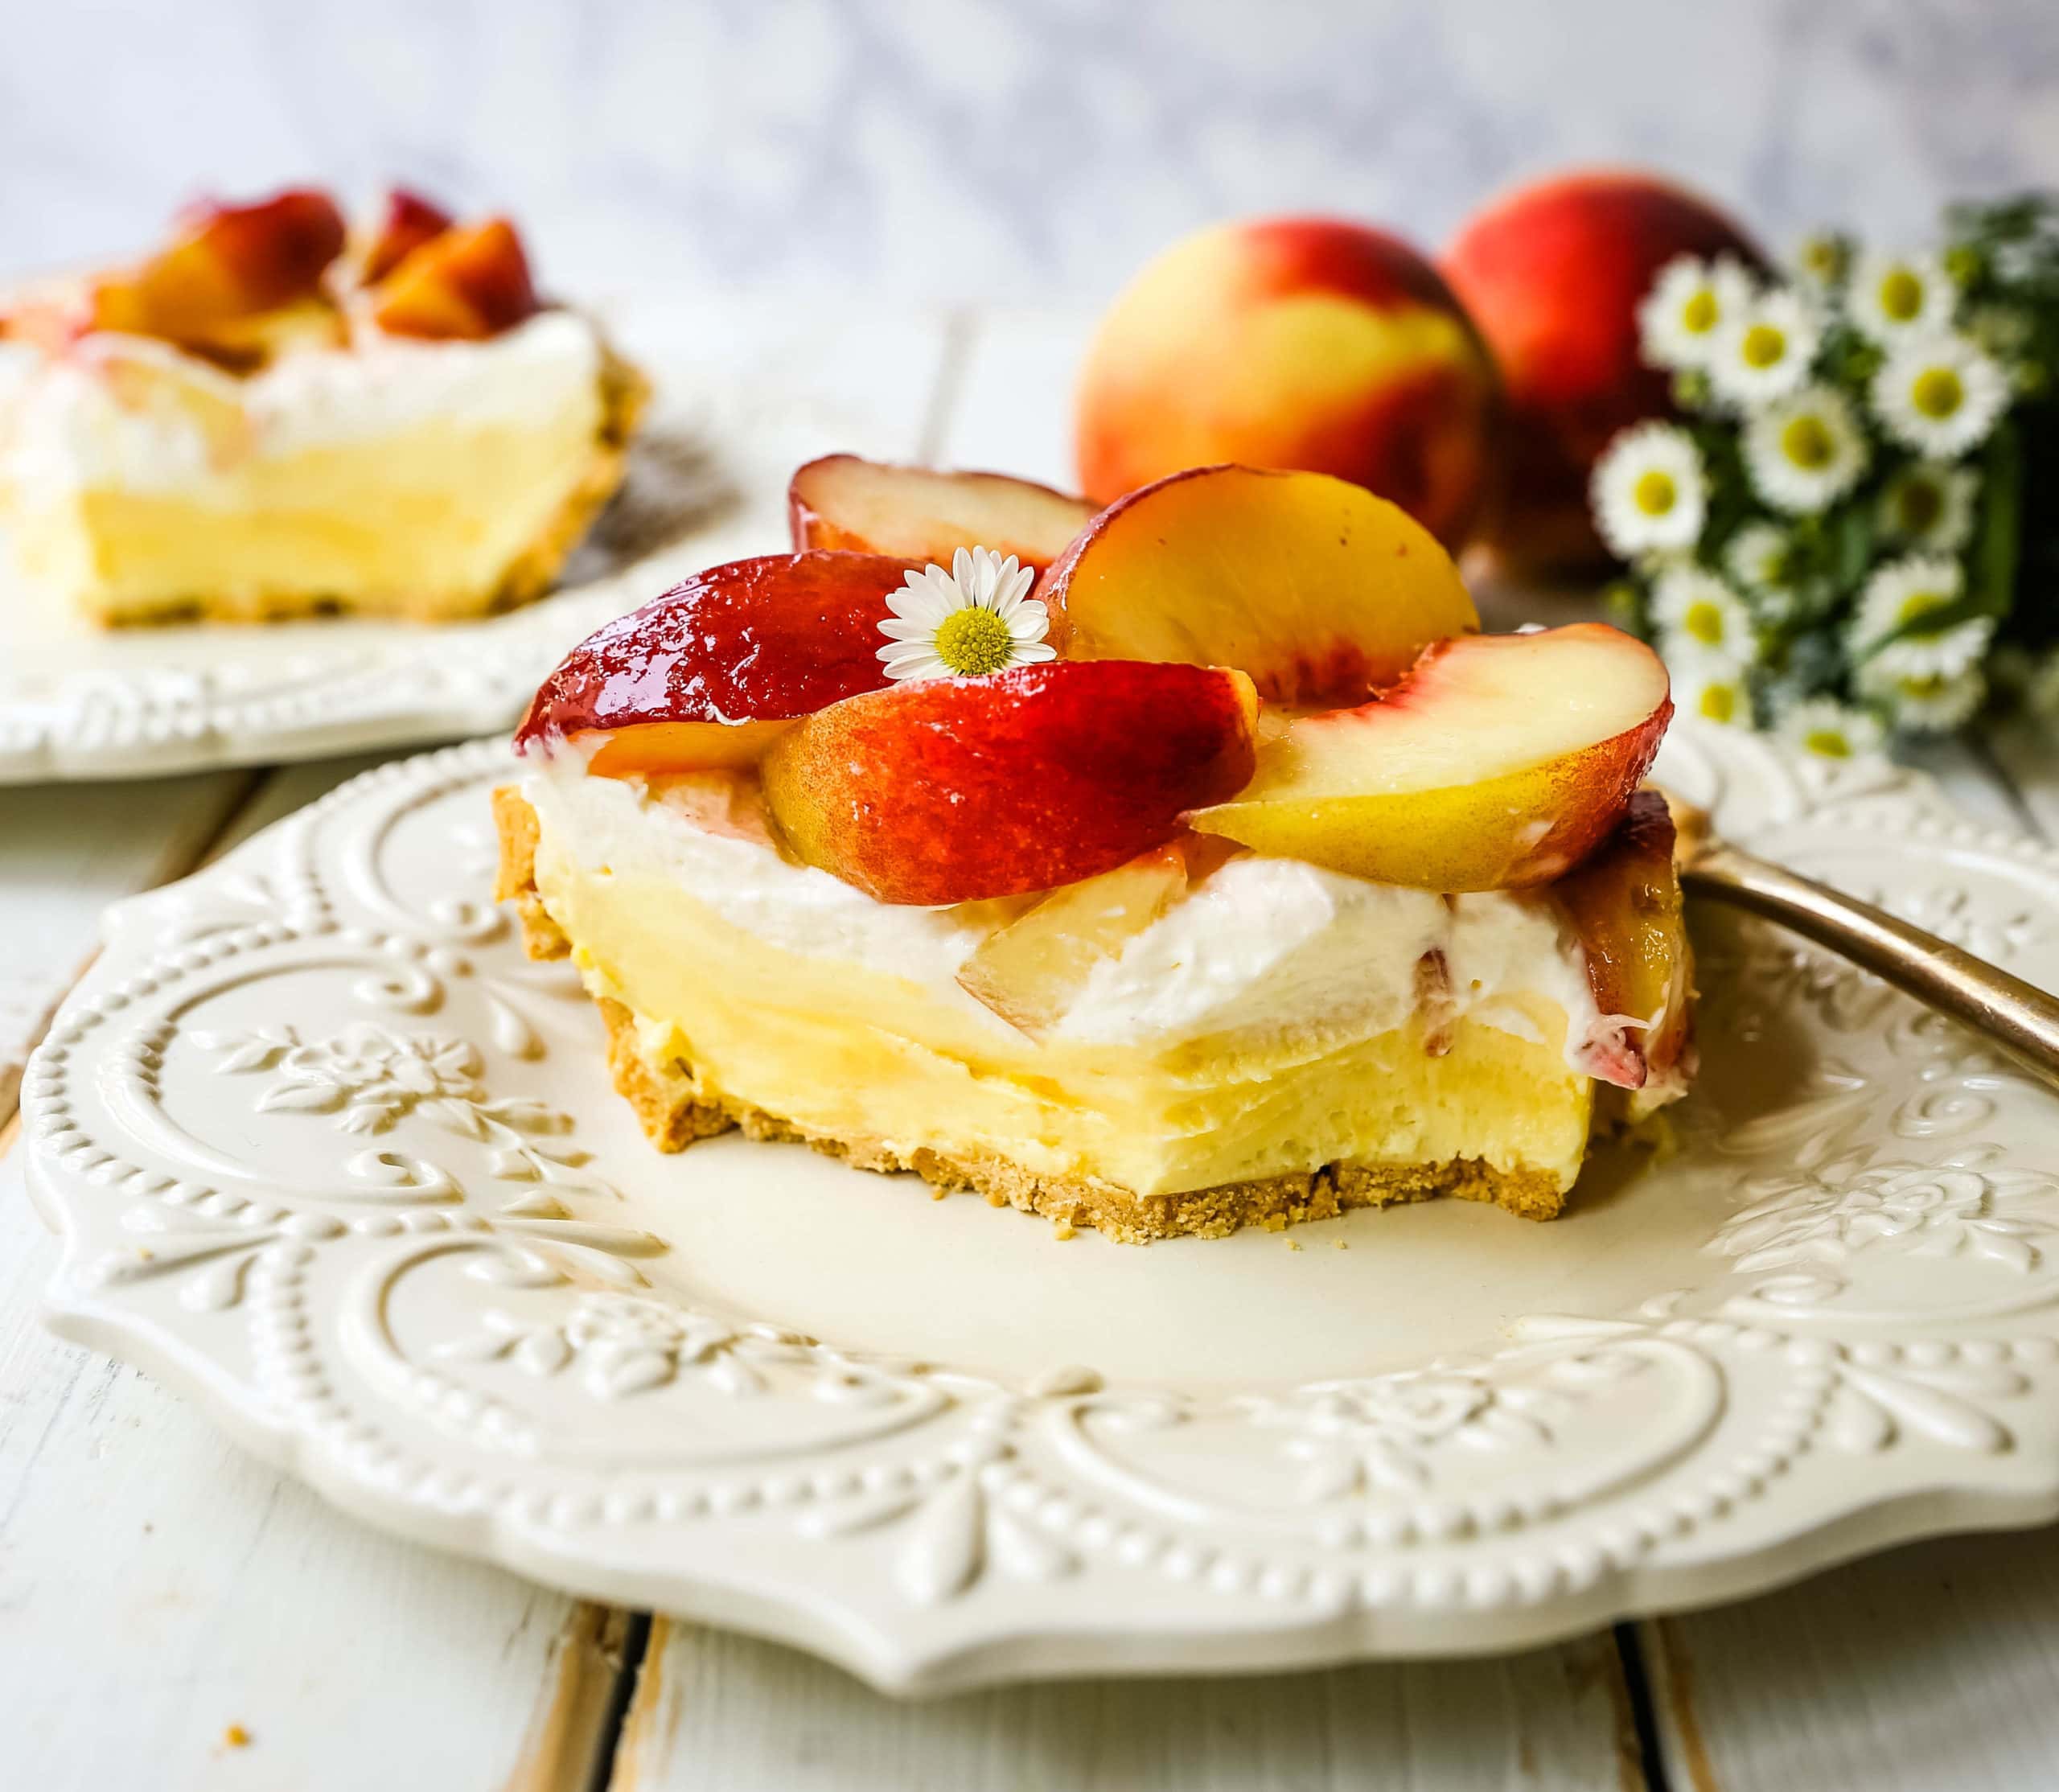 Peaches and Cream Pie. A quick and easy no-bake creamy peach pie with a buttery graham cracker crust, a sweet custard filling, fresh whipped cream, and sliced peaches.  www.modernhoney.com #pie #nobakedessert #nobakepie #peachdessert #peaches #peach 